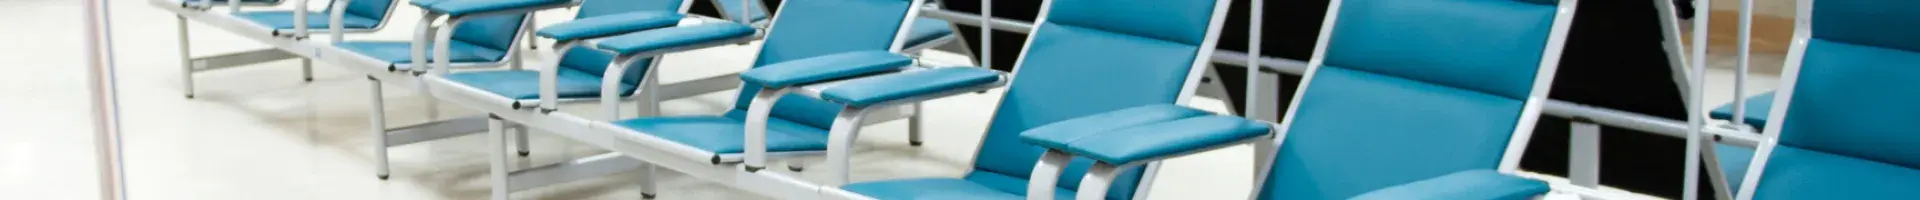 The Waiting Room for a Dialysis Center with Blue Empty Chairs and a Clean Floor